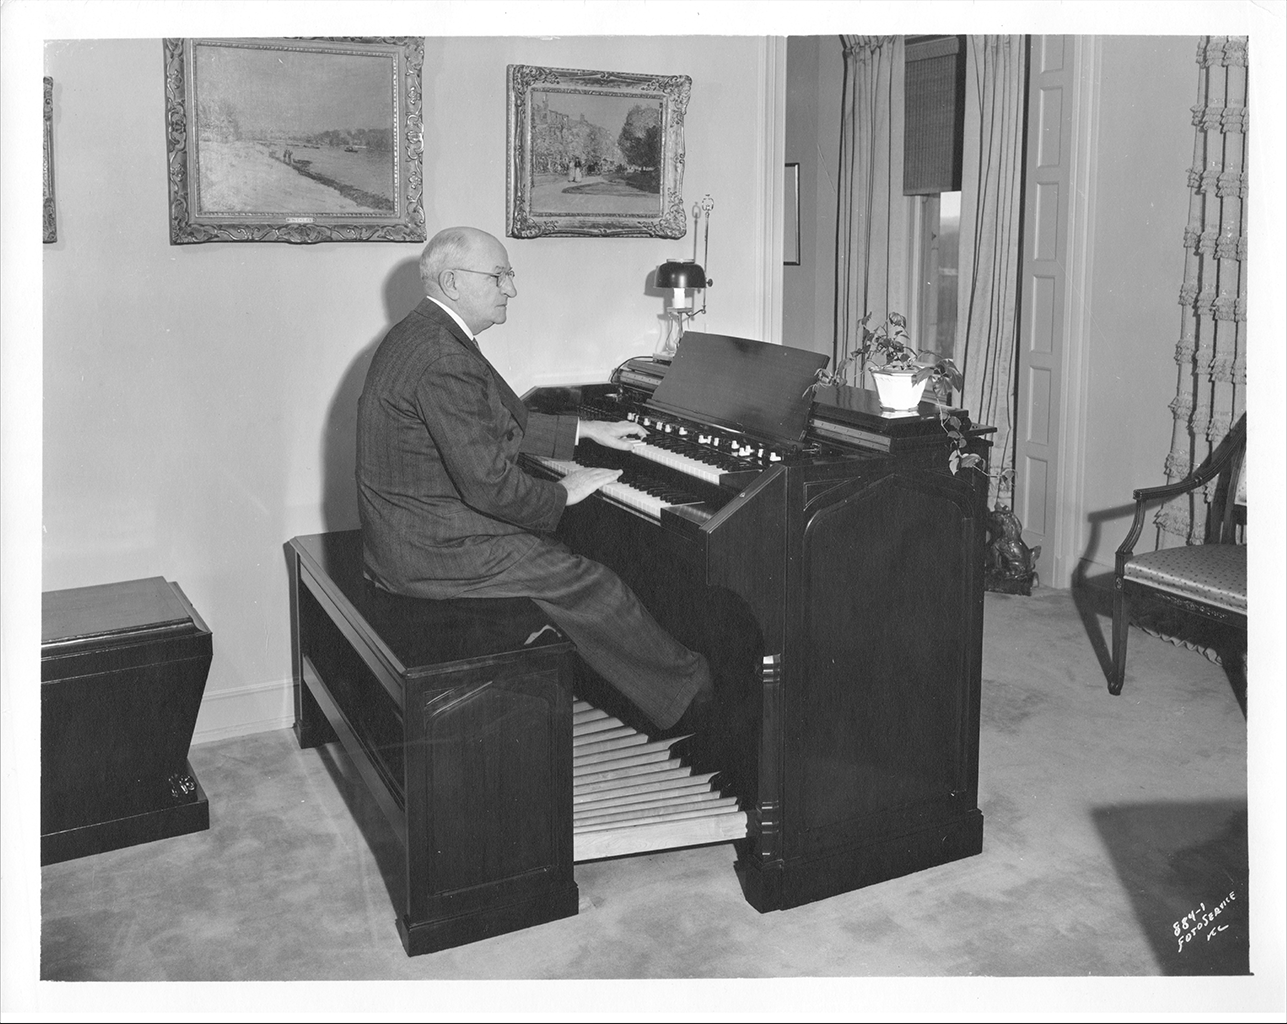 A black and white photograph of a man in a suit sitting on a bench behind an organ. His hands are resting on the keys of the instrument. Behind are two paintings which are hung along the wall.